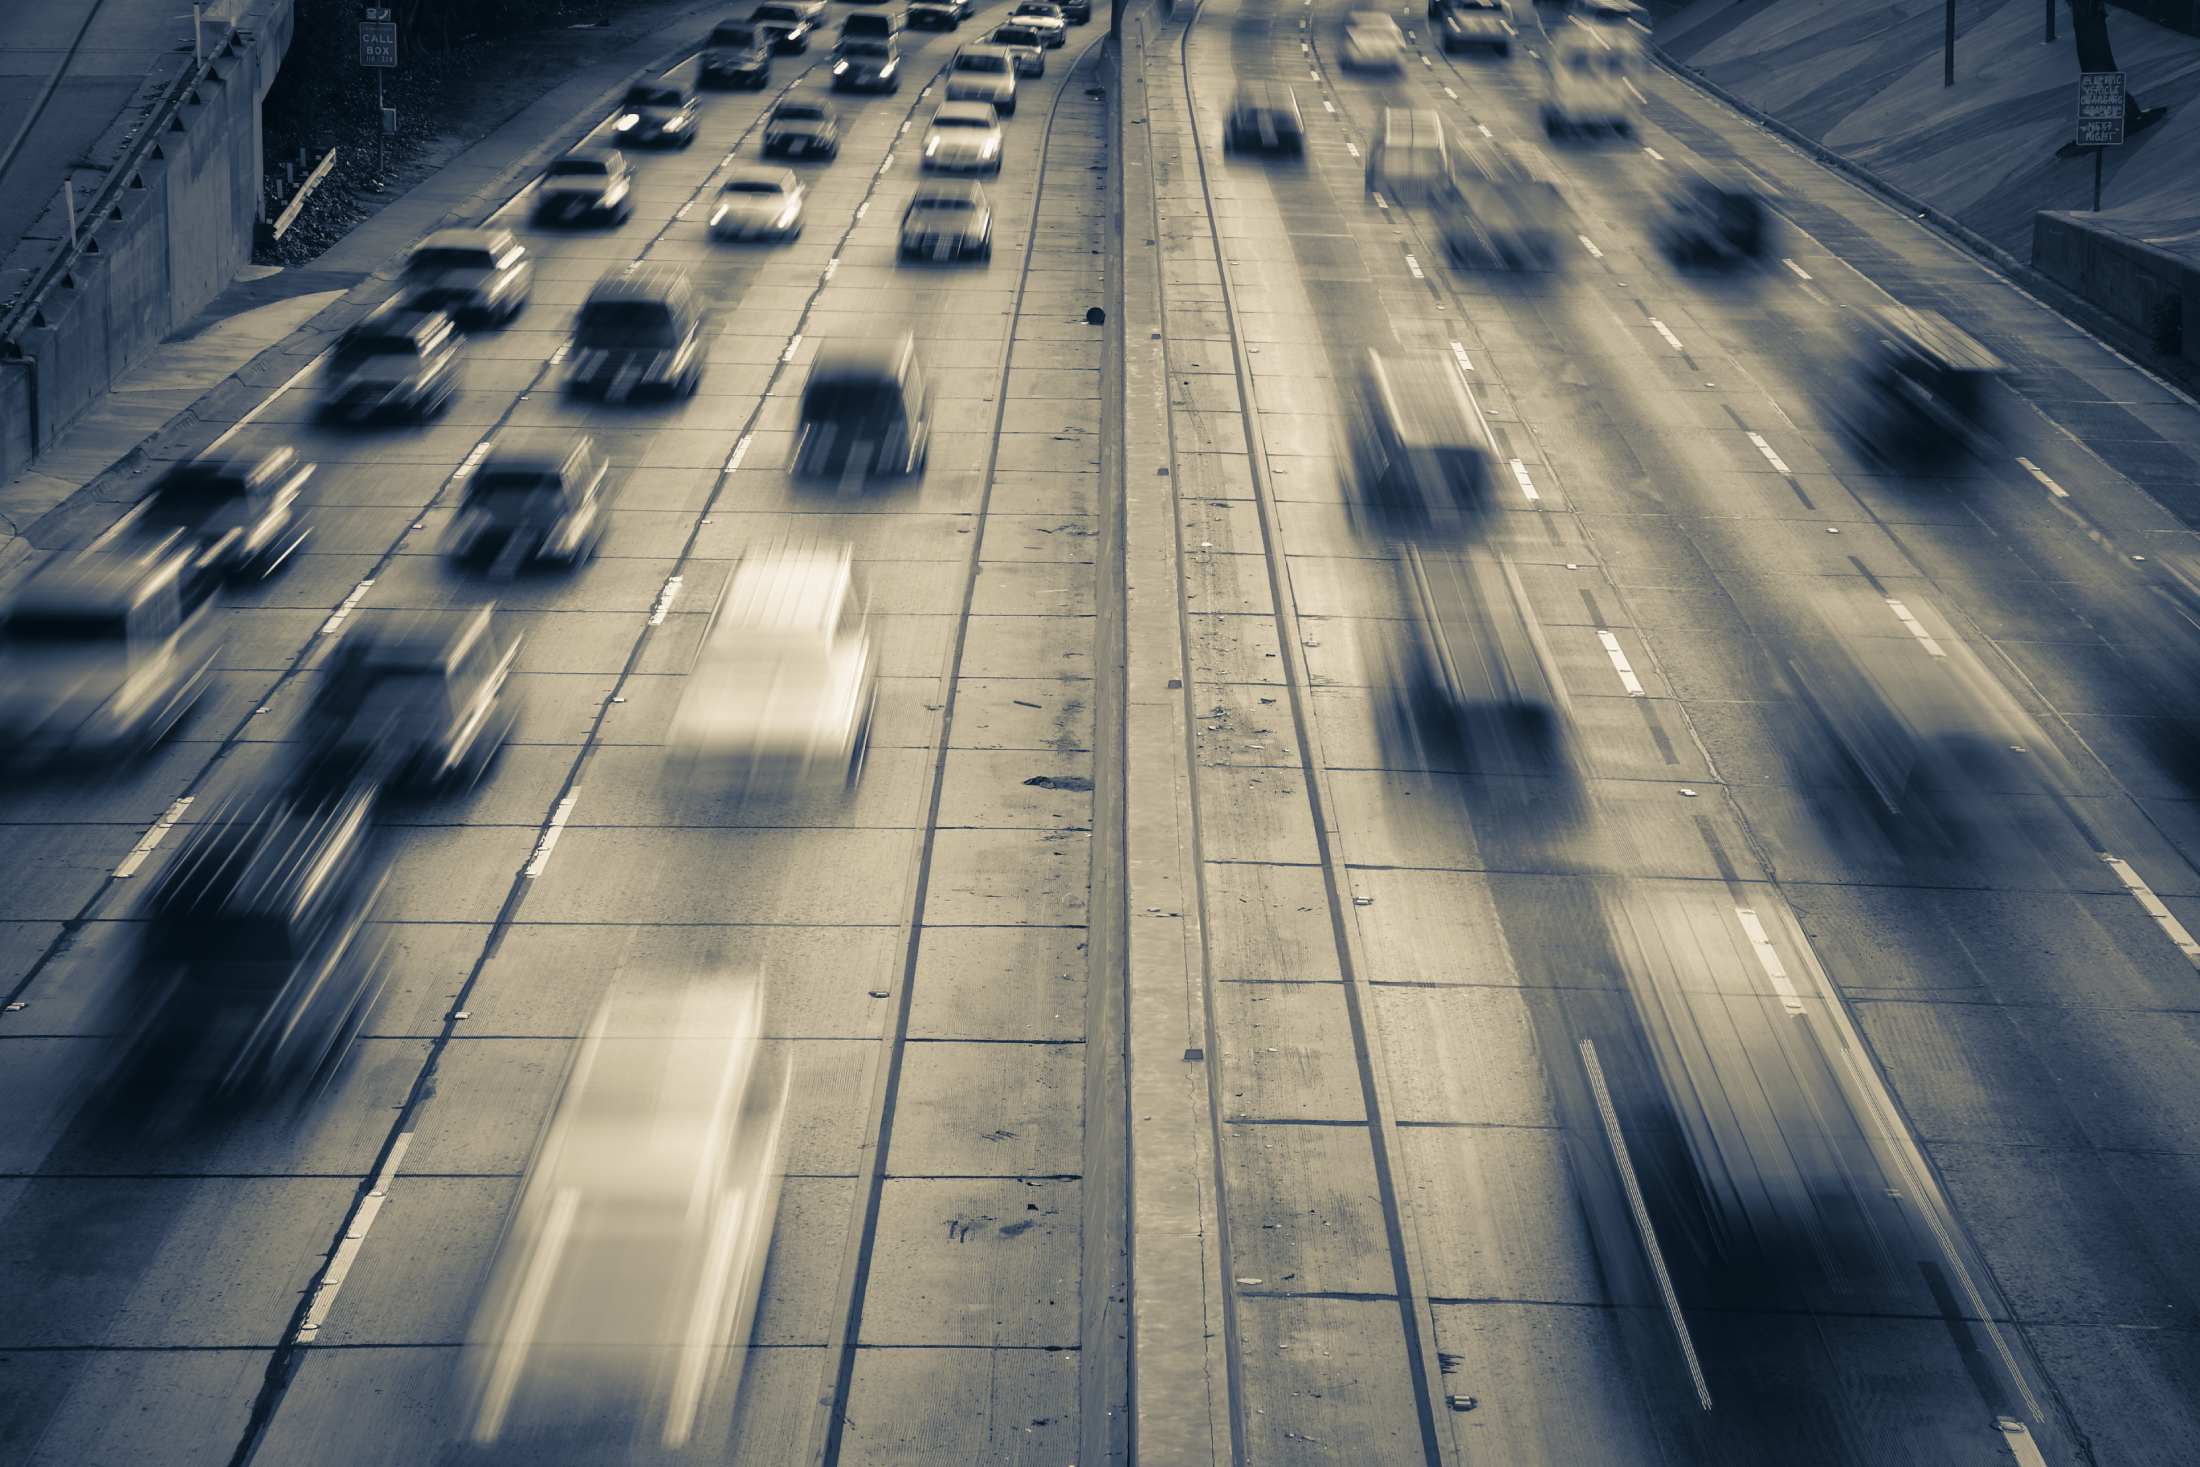 Vehicles moving in full speed on the road